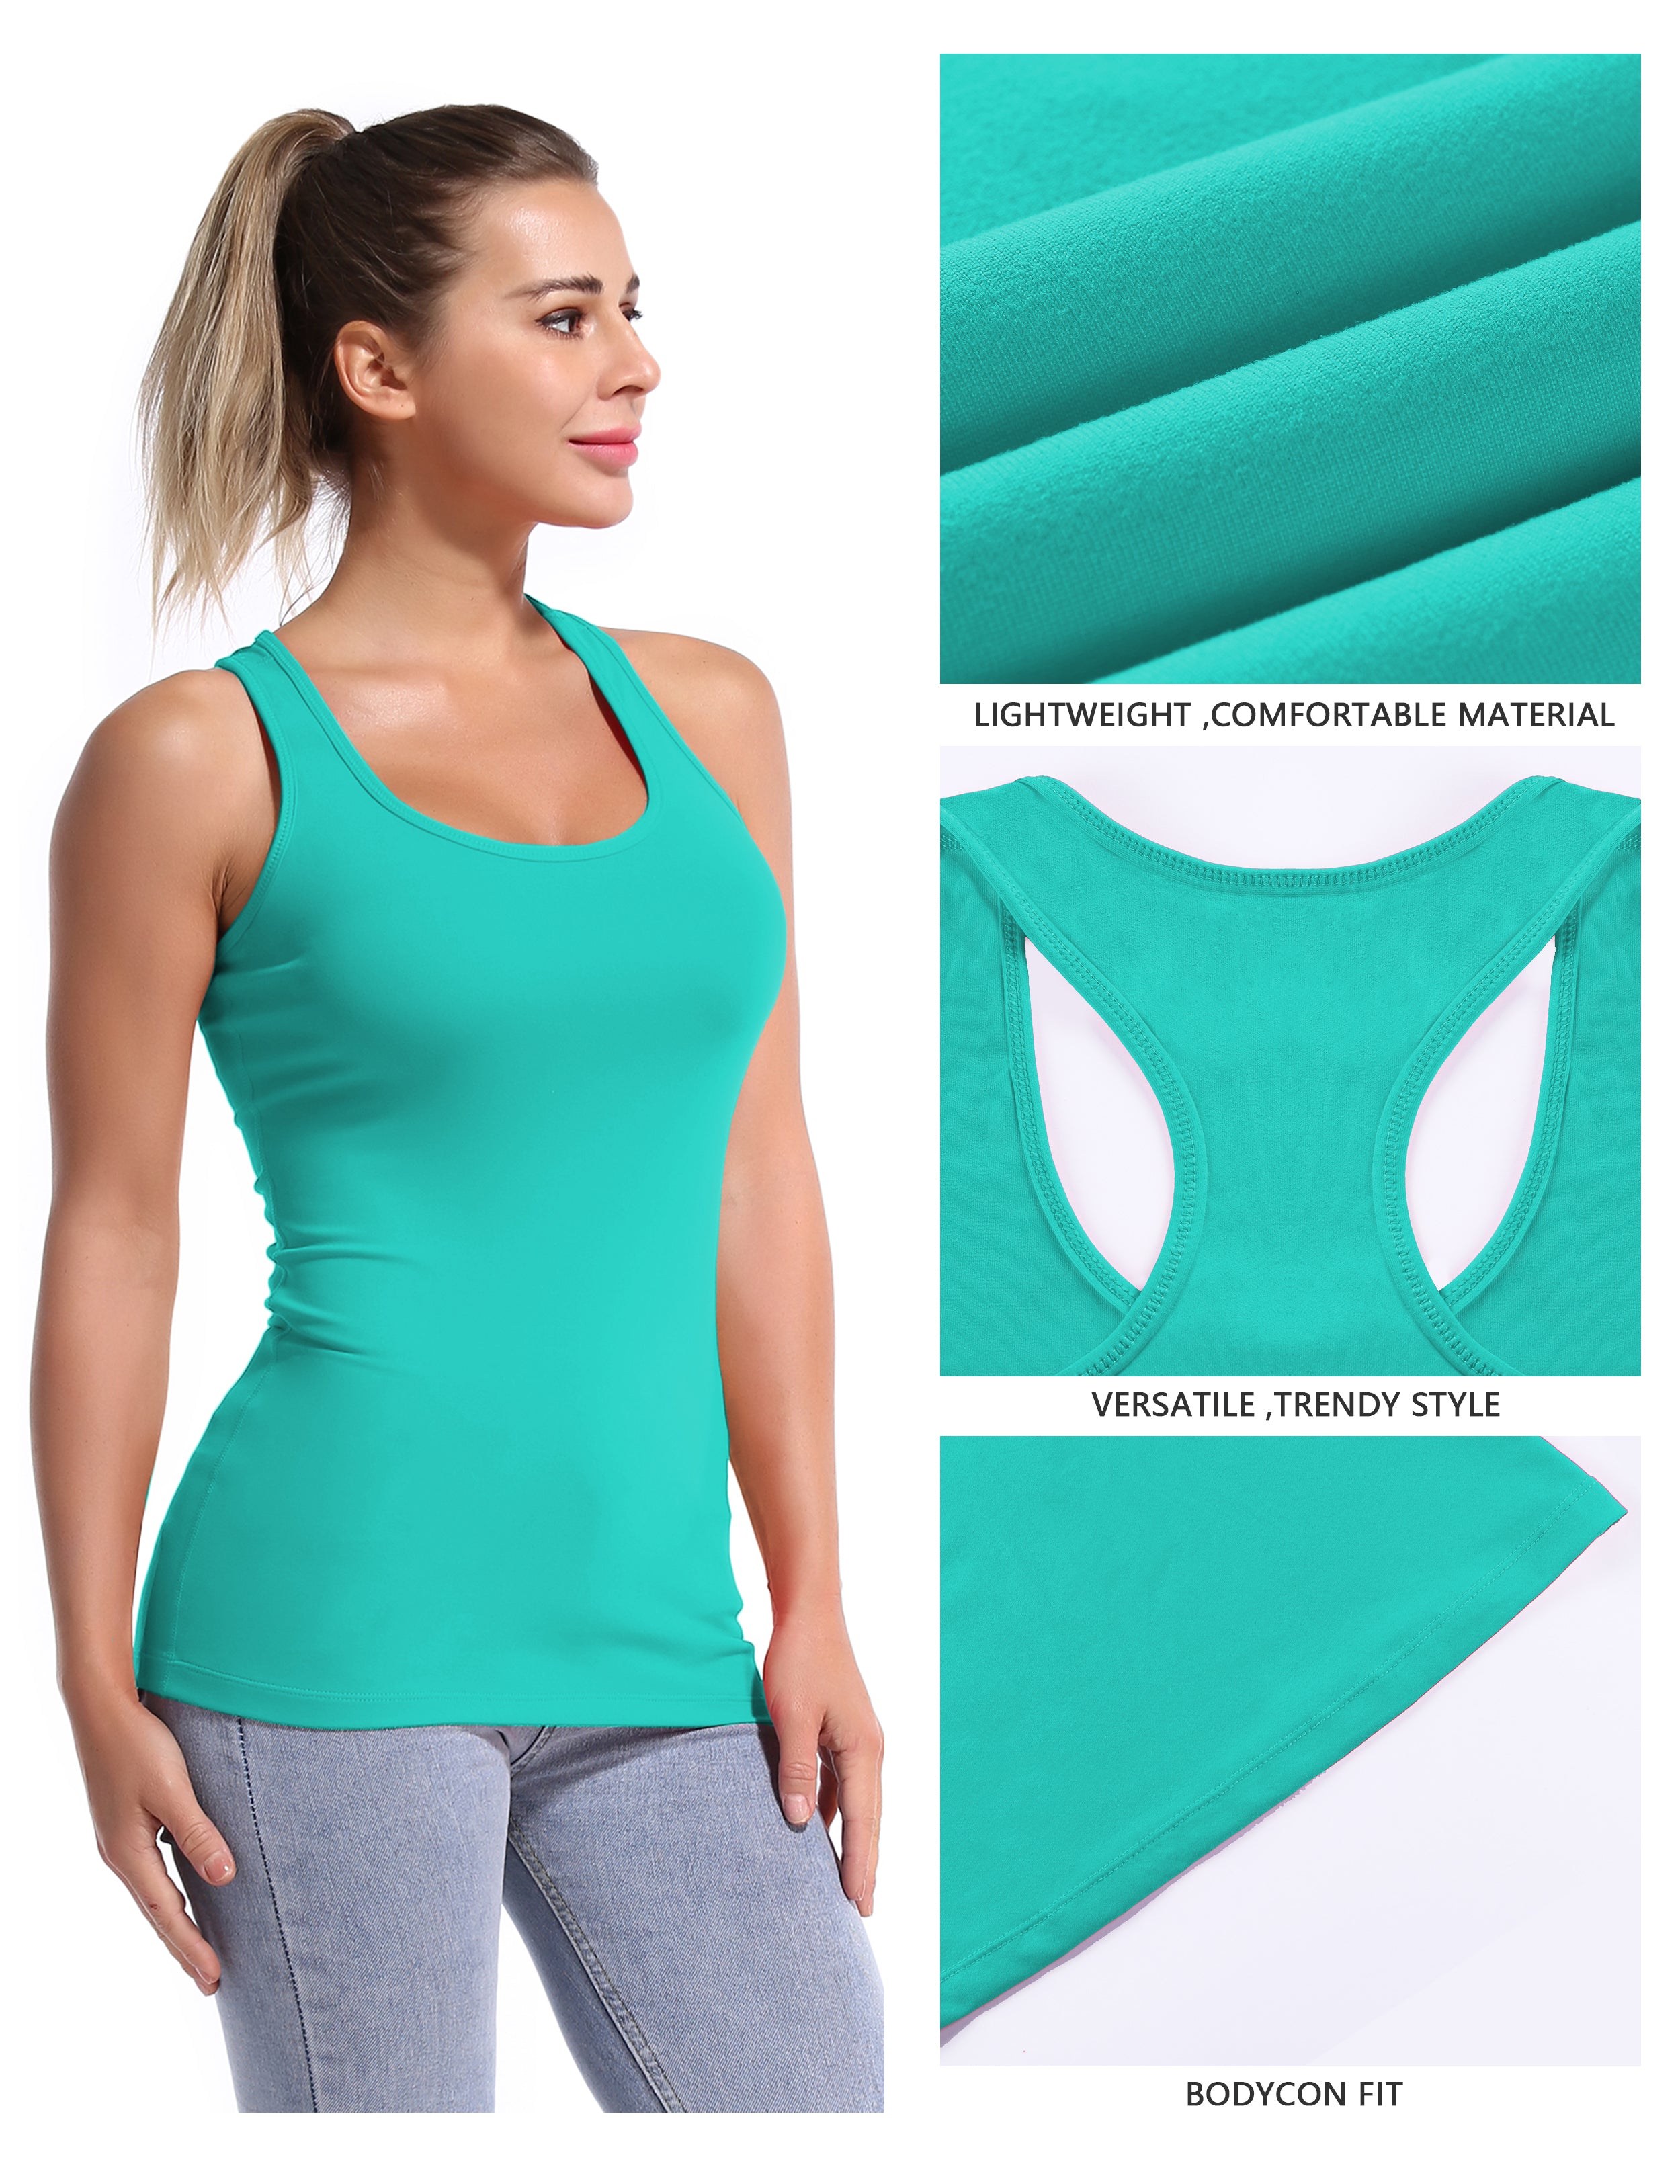 Racerback Athletic Tank Tops cyan 92%Nylon/8%Spandex(Cotton Soft) Designed for Golf Tight Fit So buttery soft, it feels weightless Sweat-wicking Four-way stretch Breathable Contours your body Sits below the waistband for moderate, everyday coverage